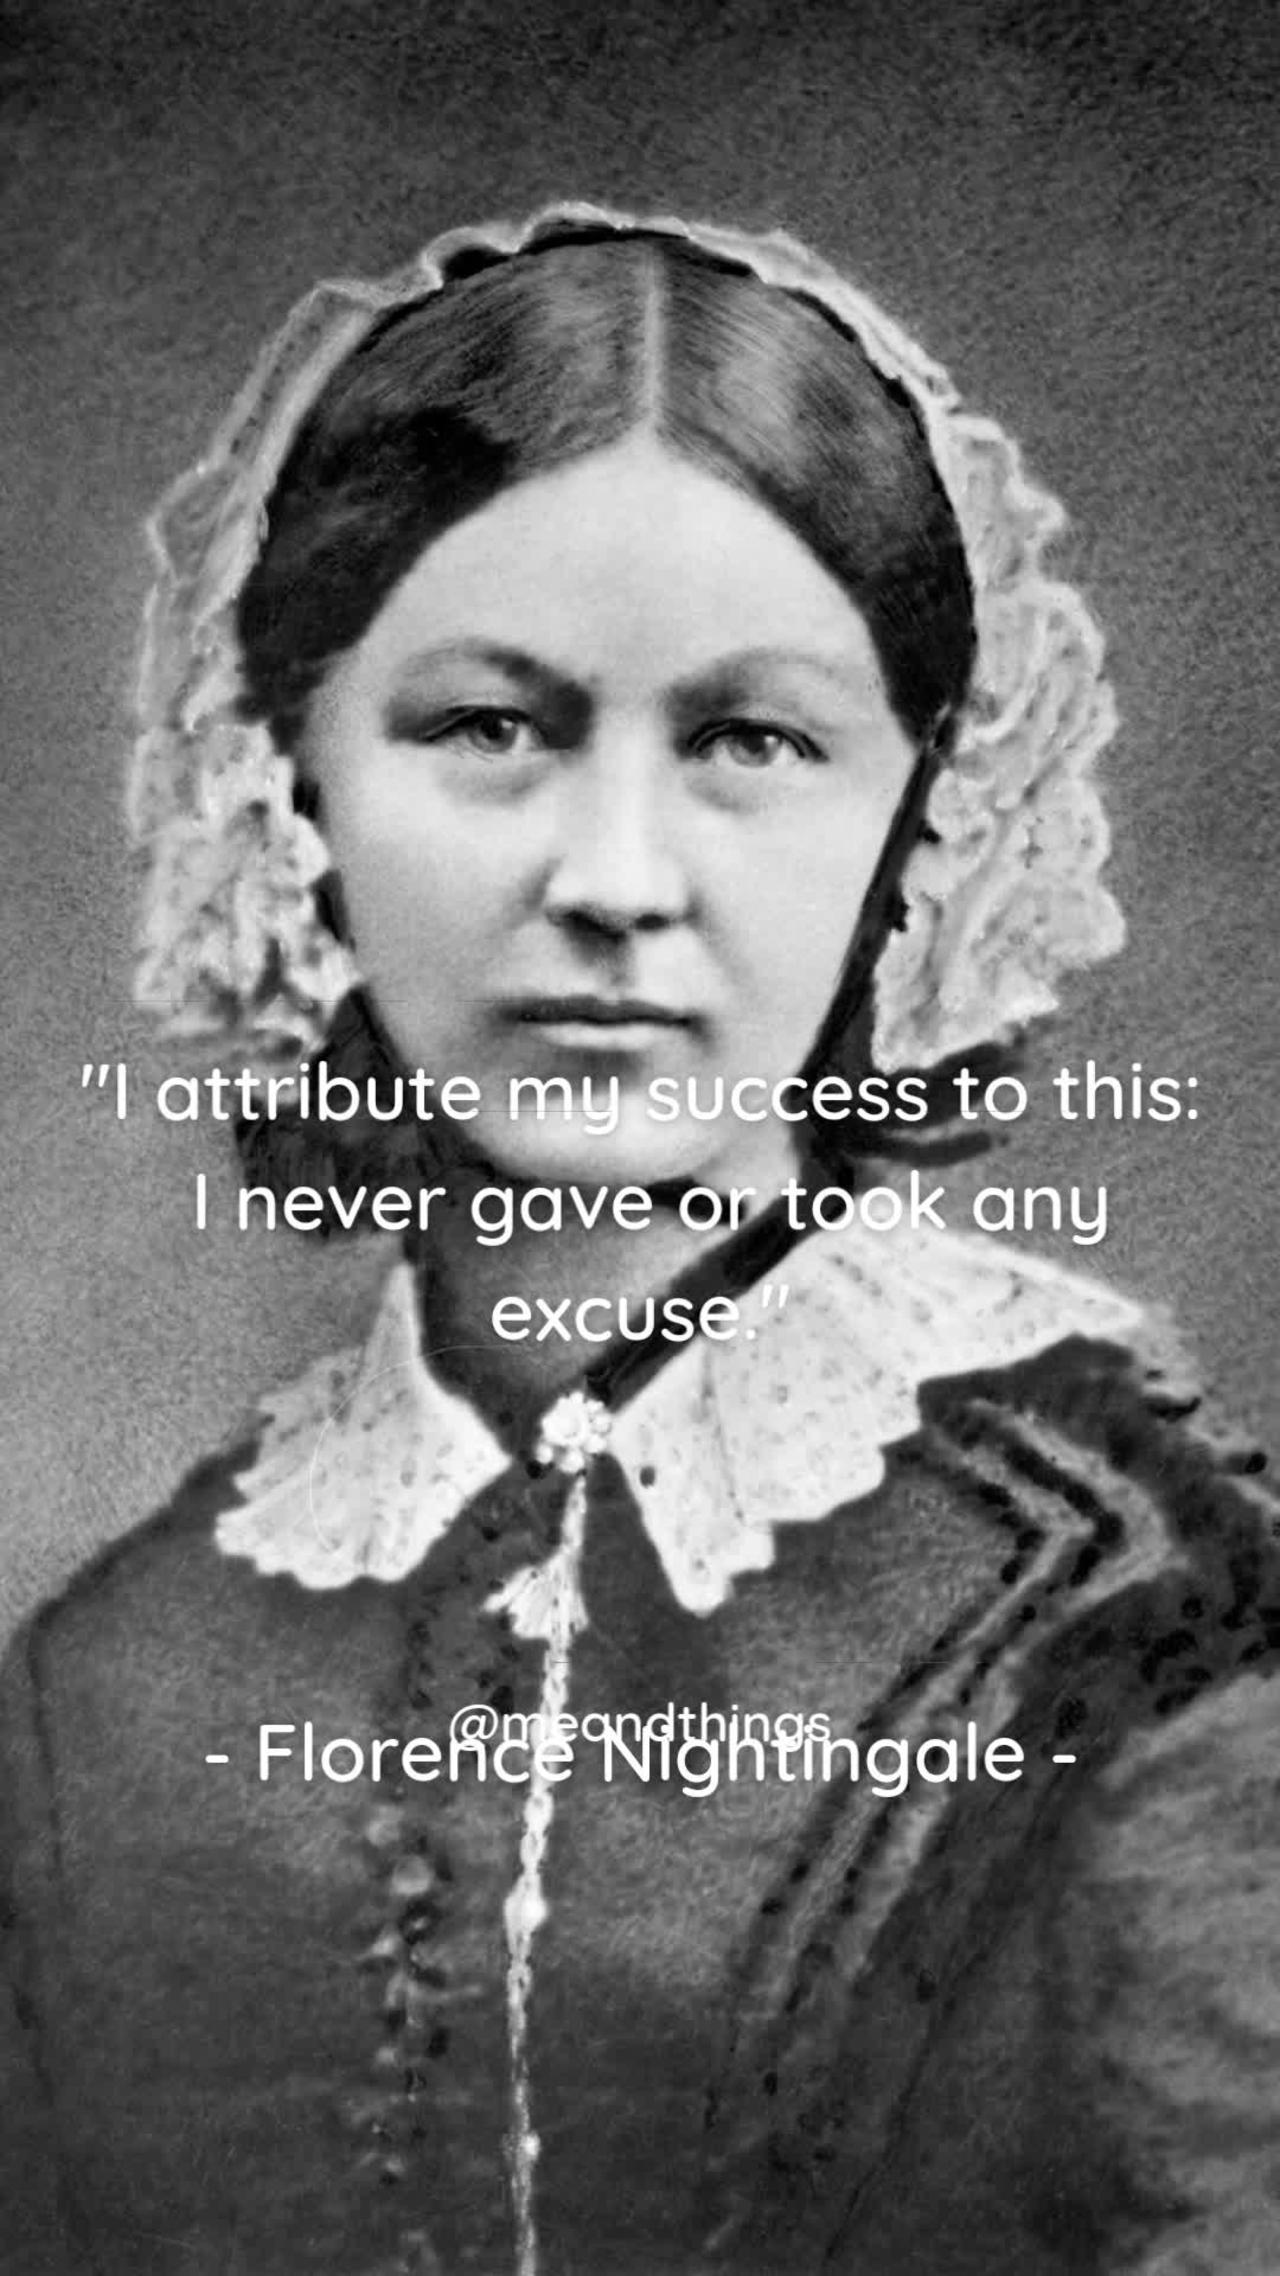 Quotes from Florence Nightingale